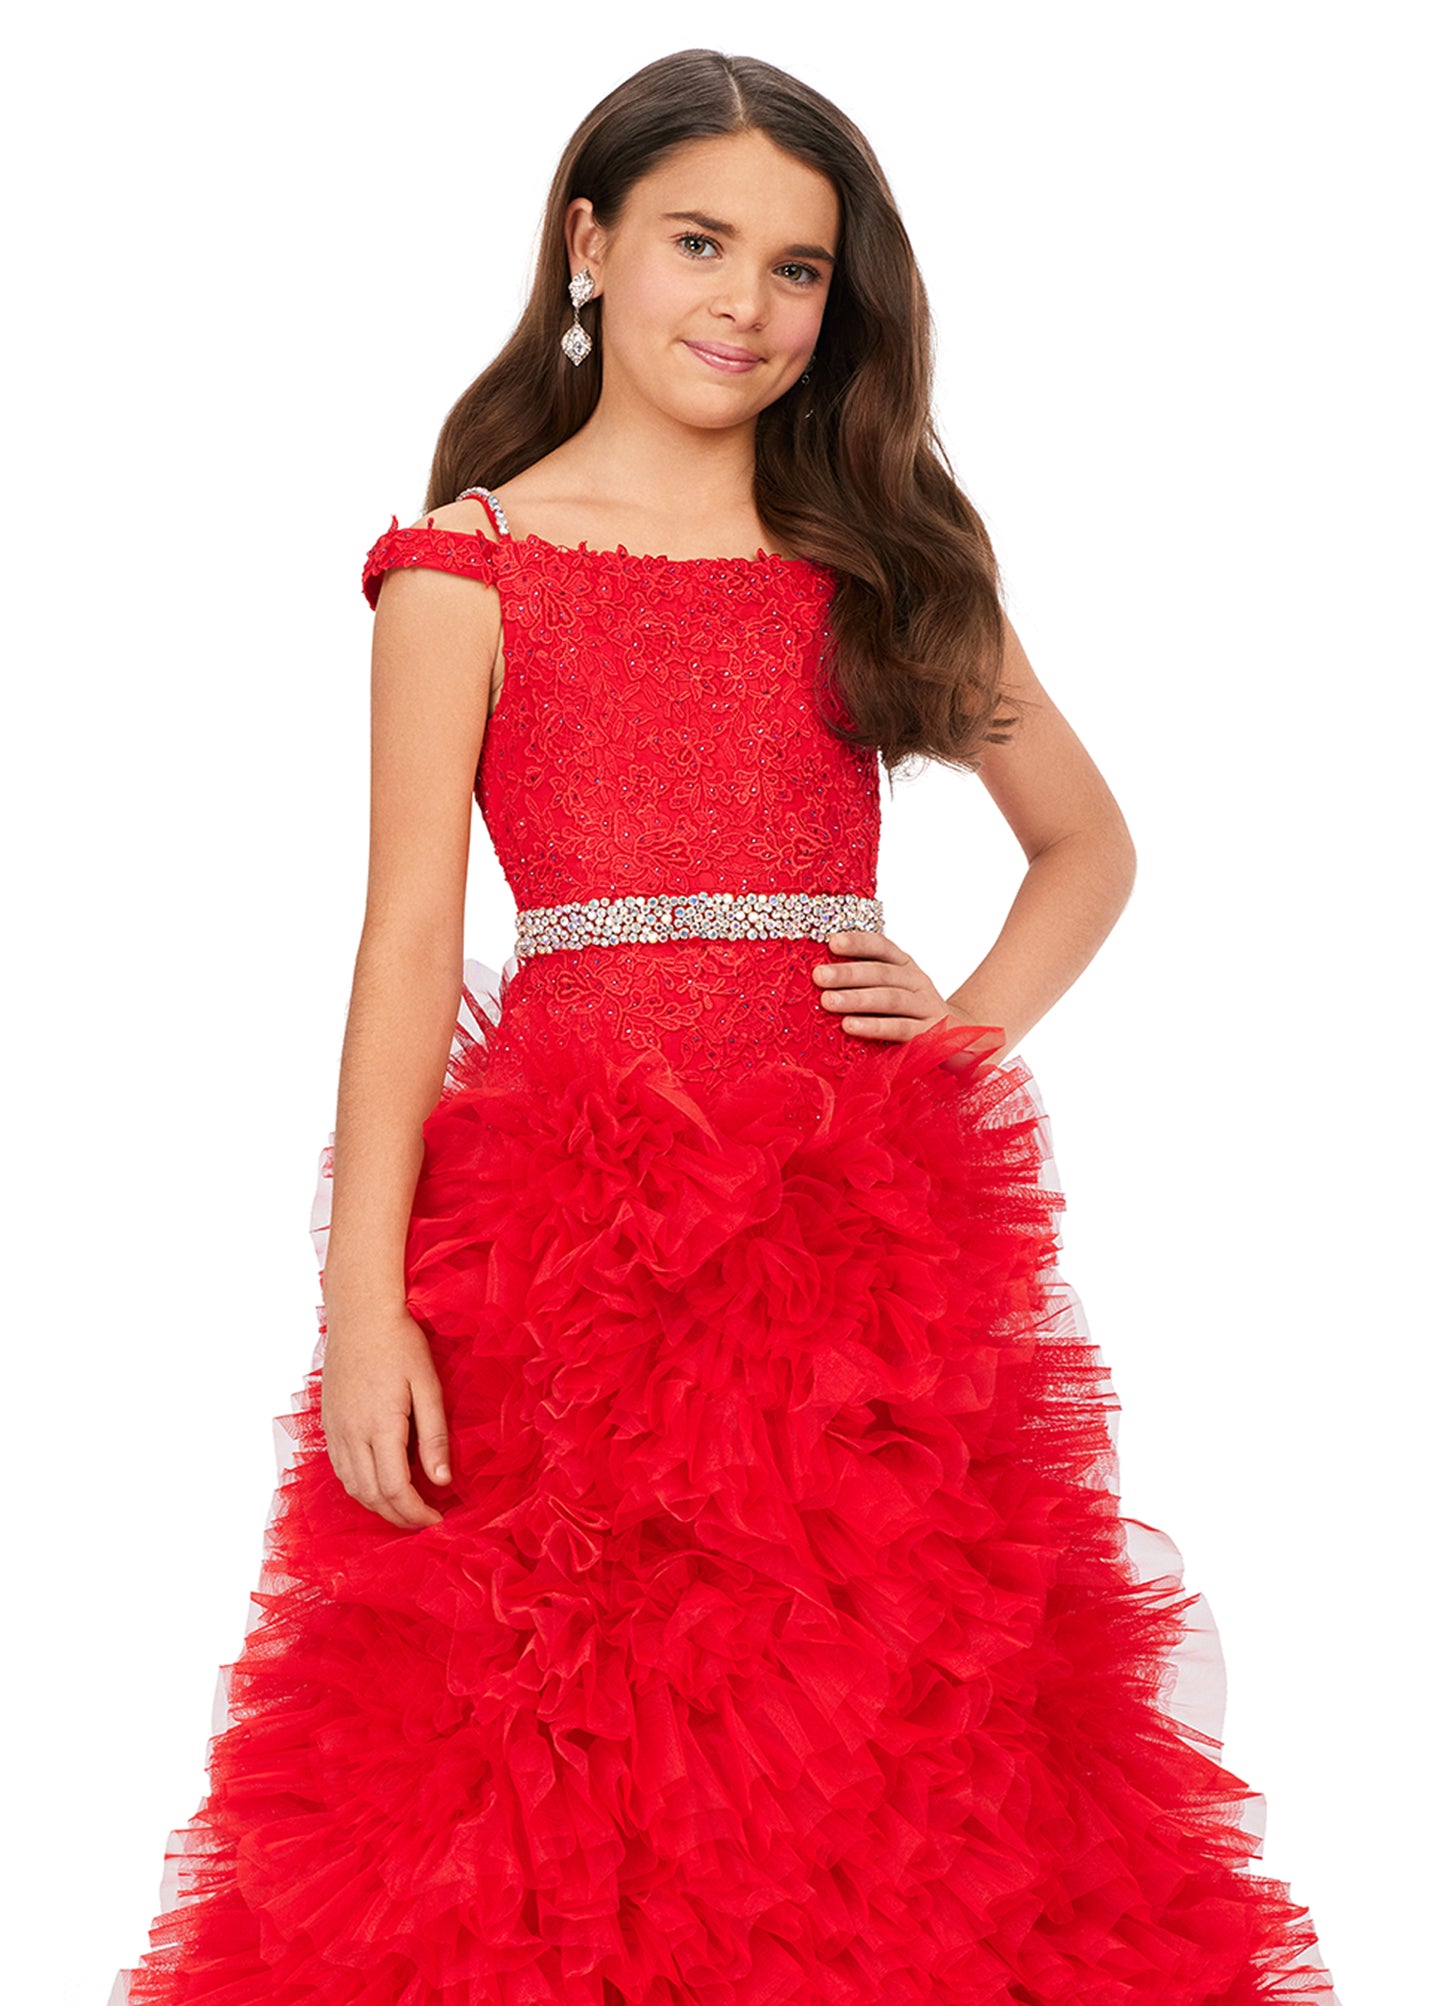 Ashley Lauren Kids 8224 Embroidered Lace Ruffle Tulle Skirt Beaded Detail Off The Shoulder Gown. Dazzle in this off shoulder gown with embroidered lace details. We love the off shoulder top and beaded accents. The cascading layers of ruffled tulle give this dress the right amount of fullness.